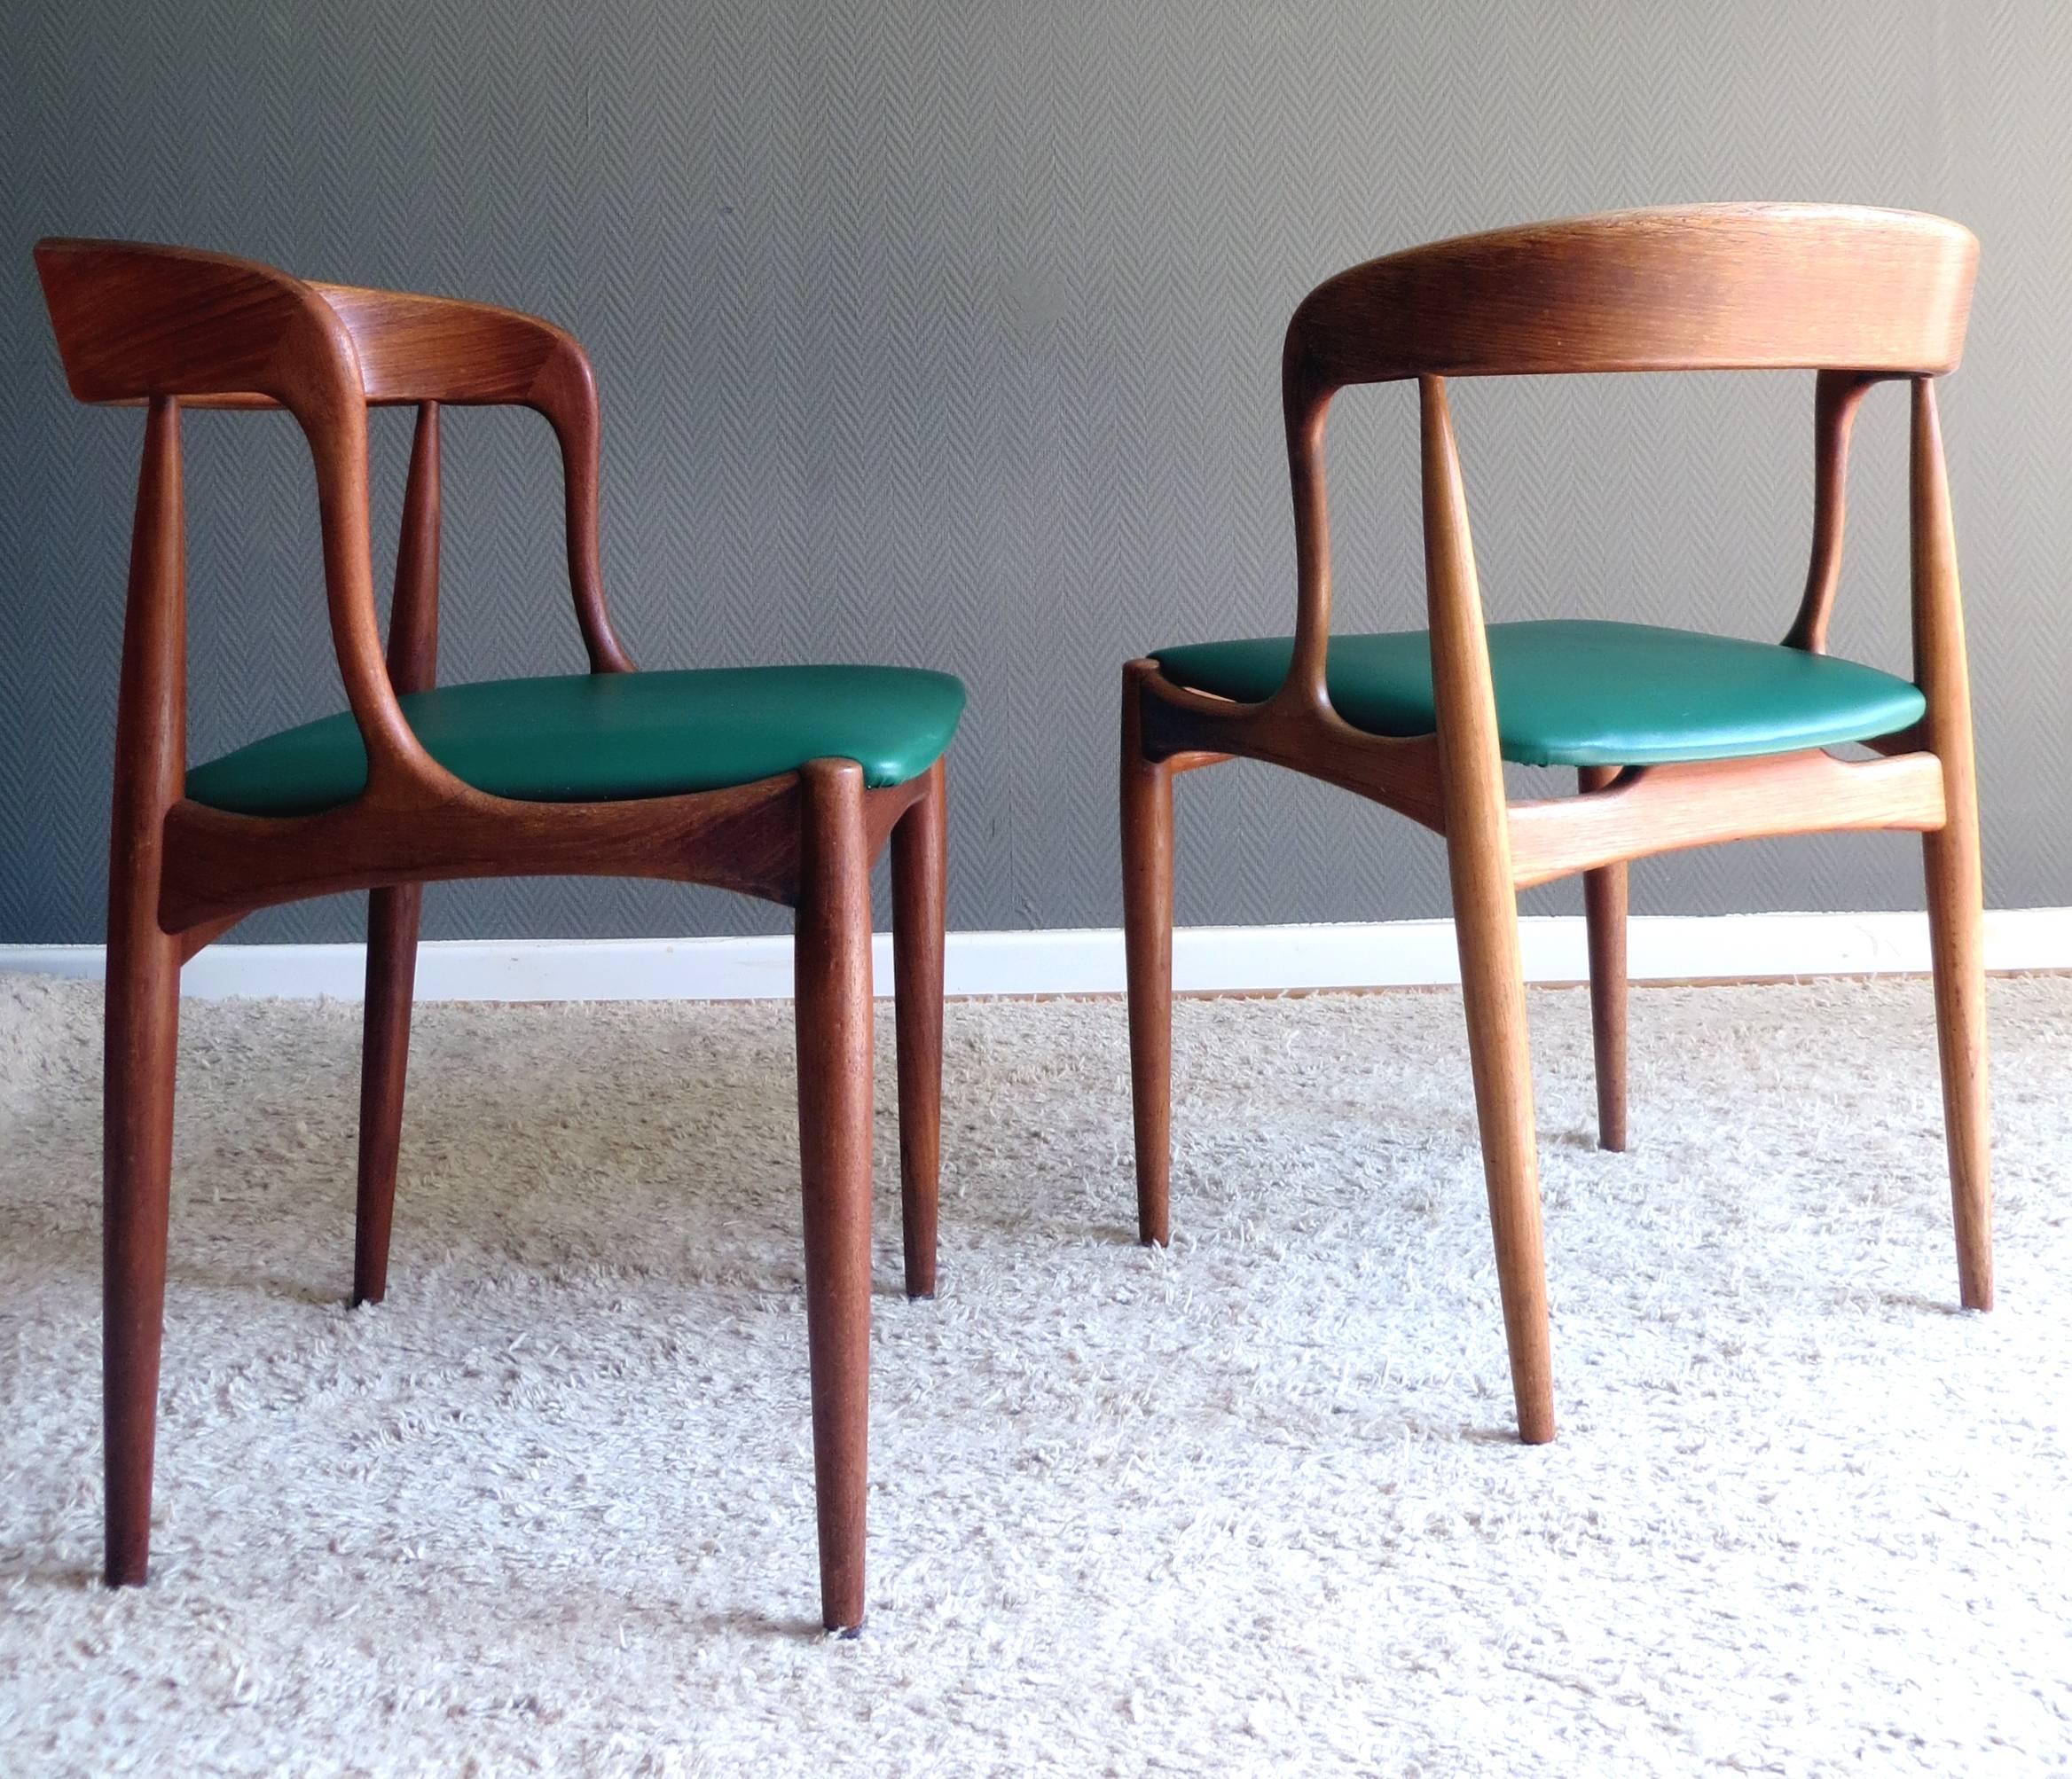 Danish Scandinavian Modern Designclassics chairs from the Mid Century in highest quality from the renowned cabinetmaker Uldum Mobelfabrik model 16 by the coveted designer Johannes Andersen. 
Special features are the organic sculptural shaped solid